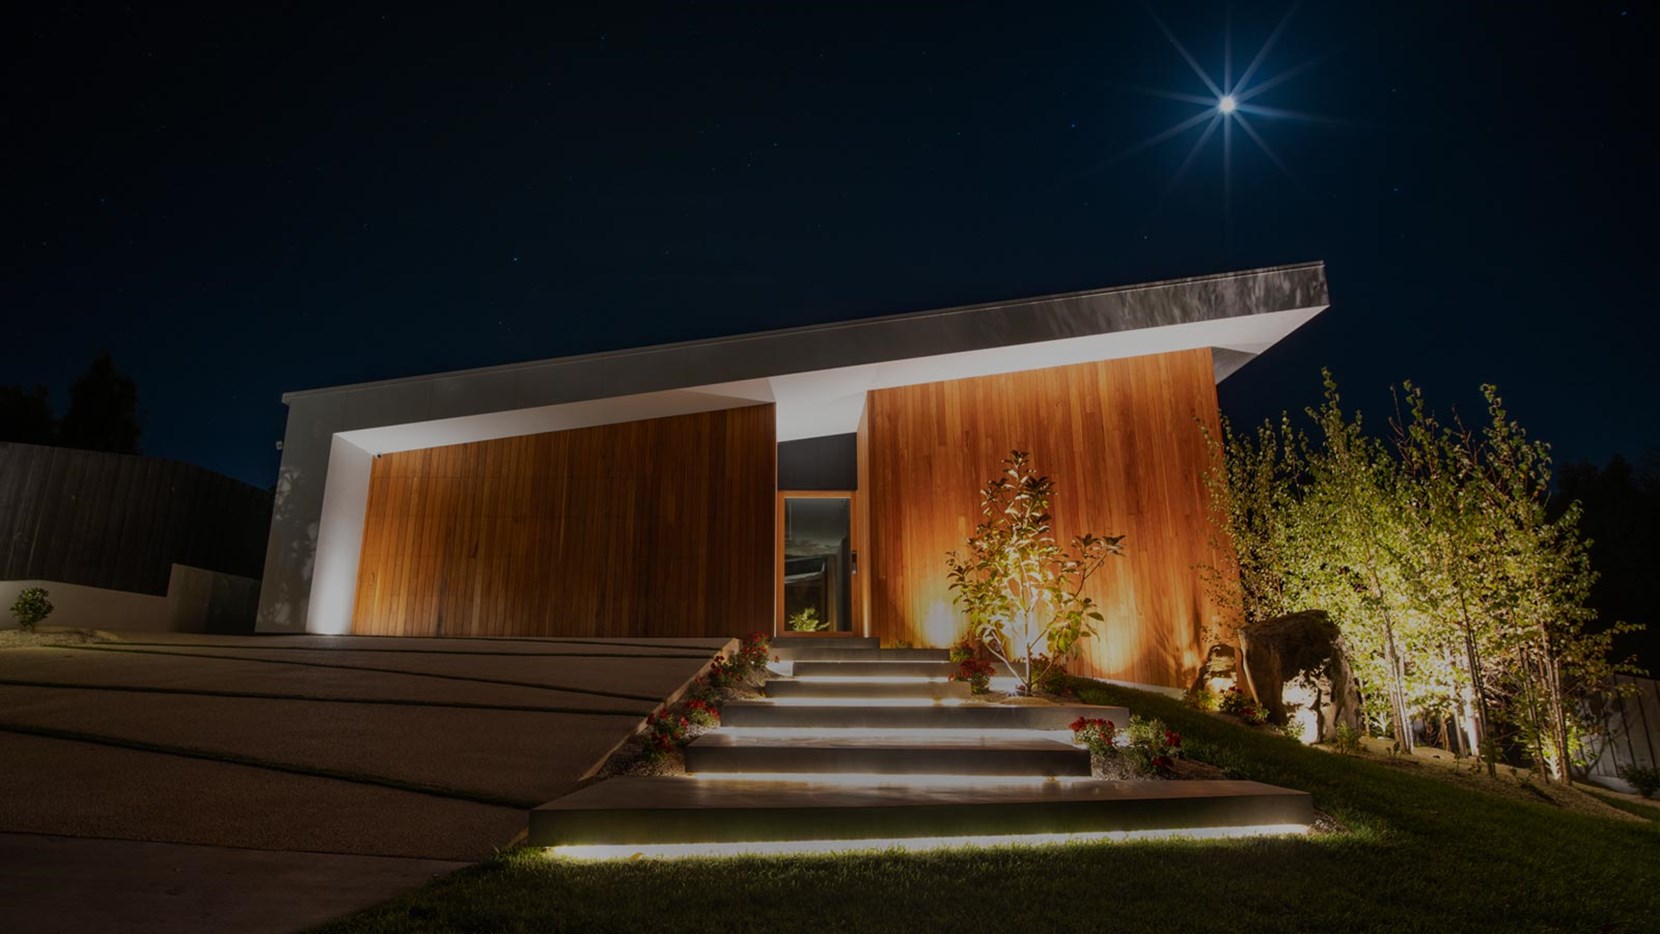 Outside of modern minimal asymmetrical house at night, lit with uplights. The steps are lit with strips of linear light